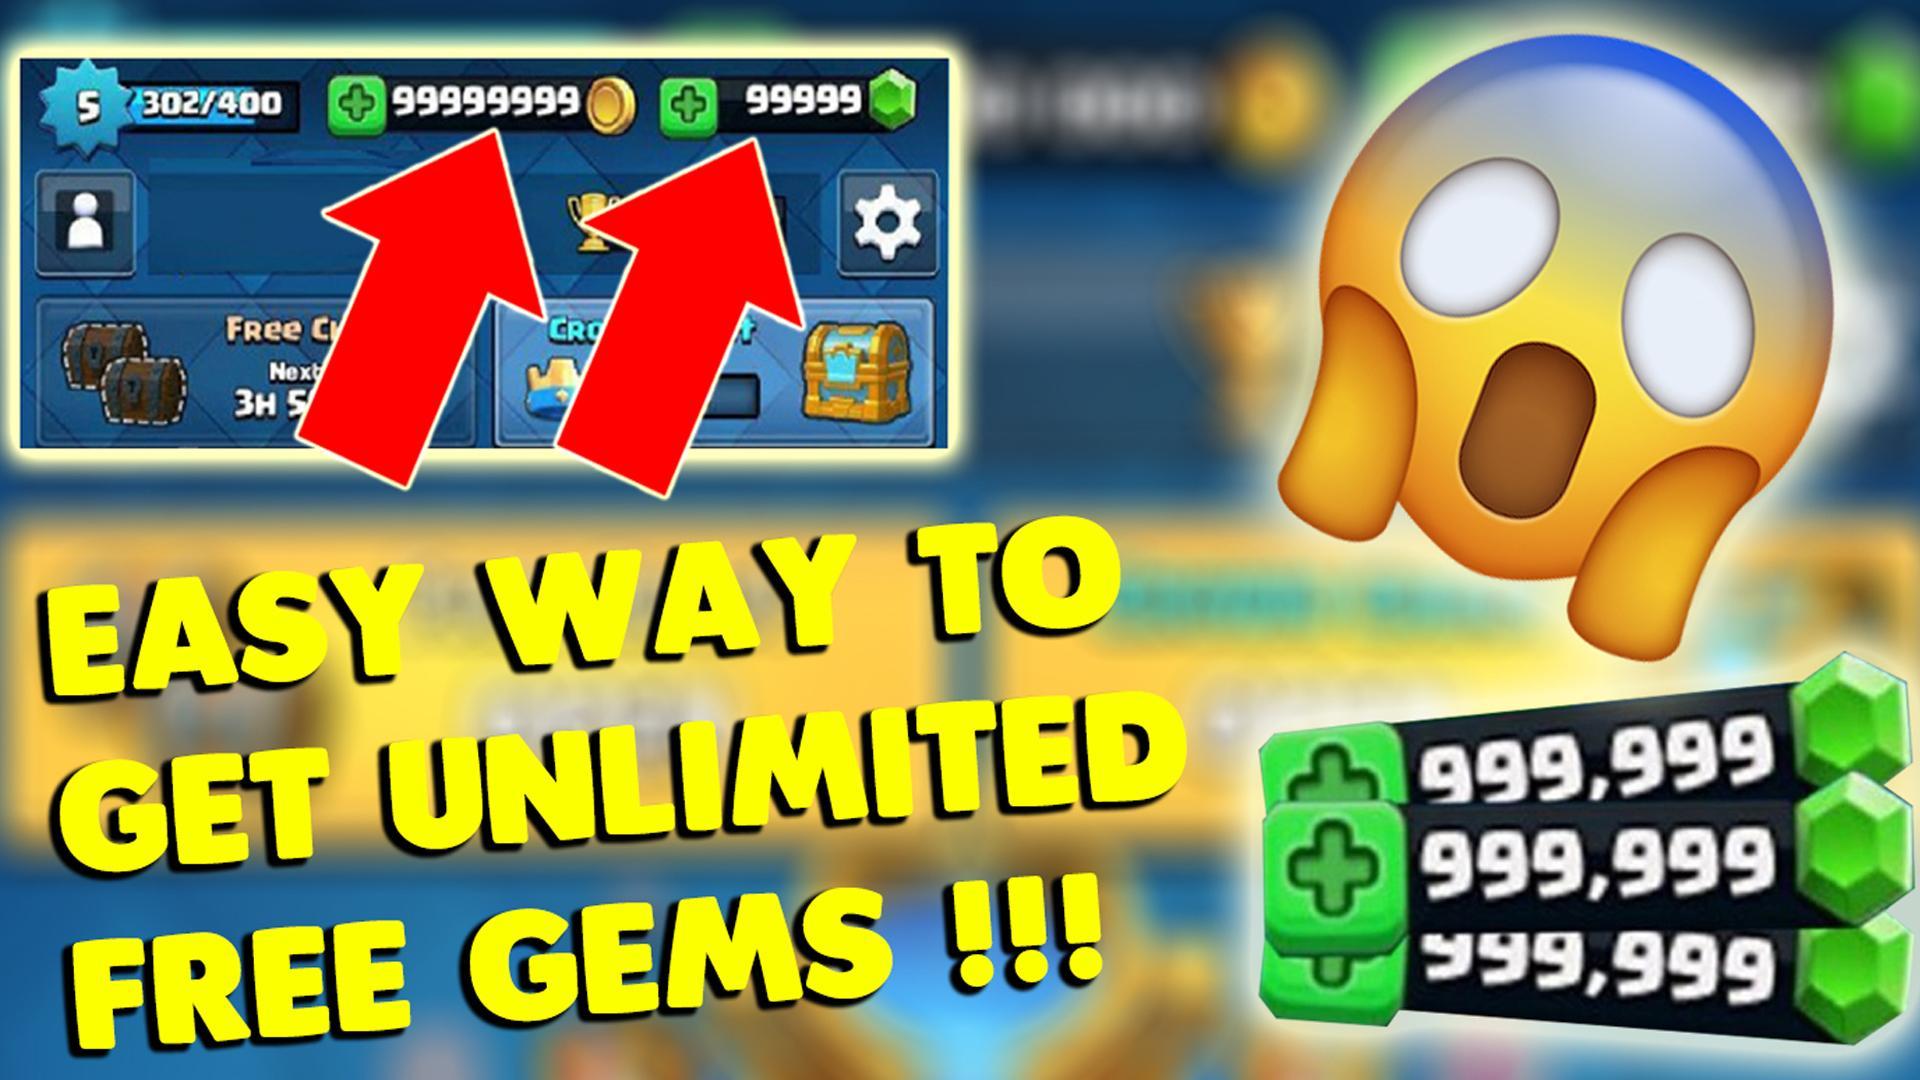 Pro Guide And Tips 2019 More Than 100m Free Gems For Android Apk Download - download guide for roblox 111 apk 2019 update